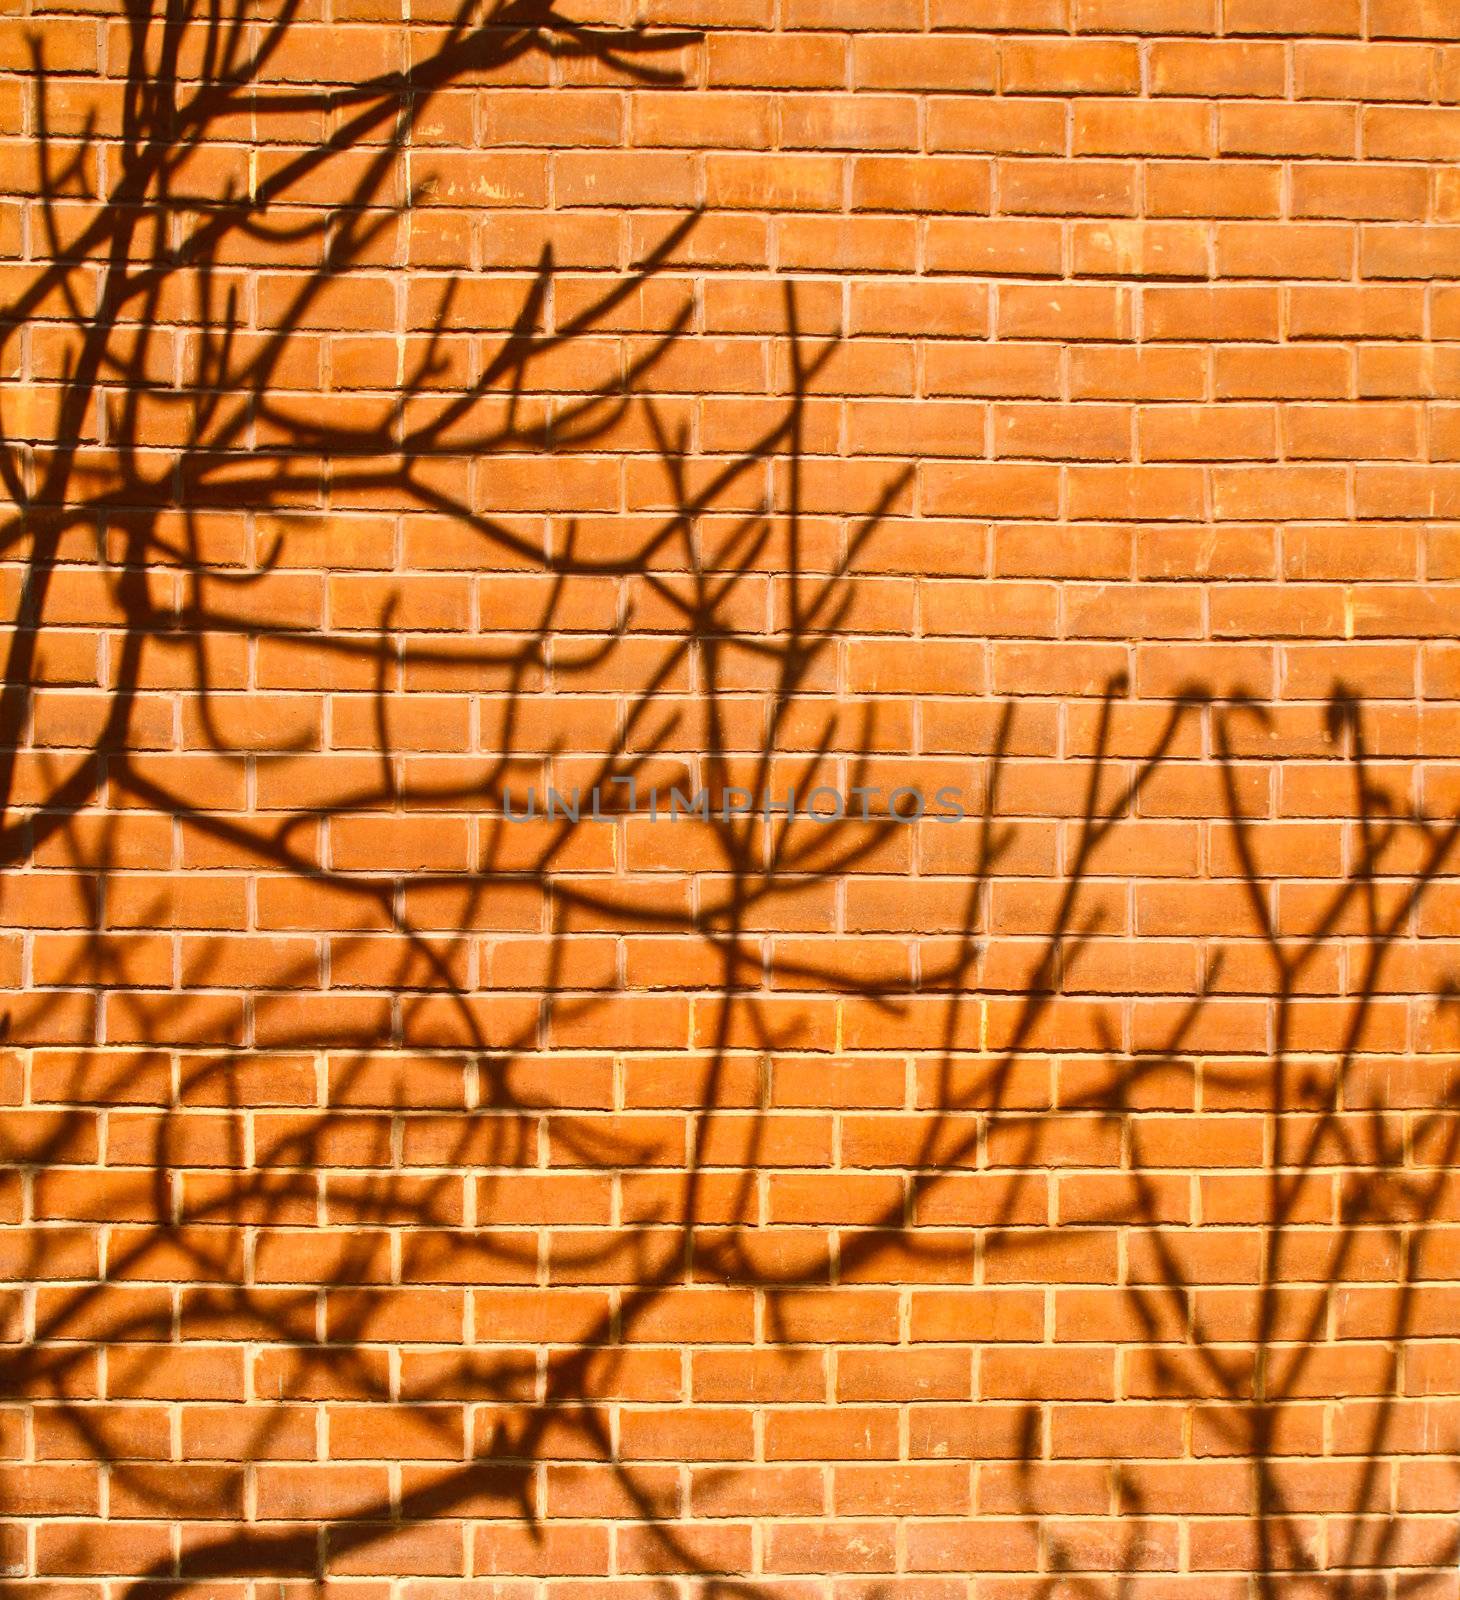 Shadow of a tree on brick wall by nuchylee